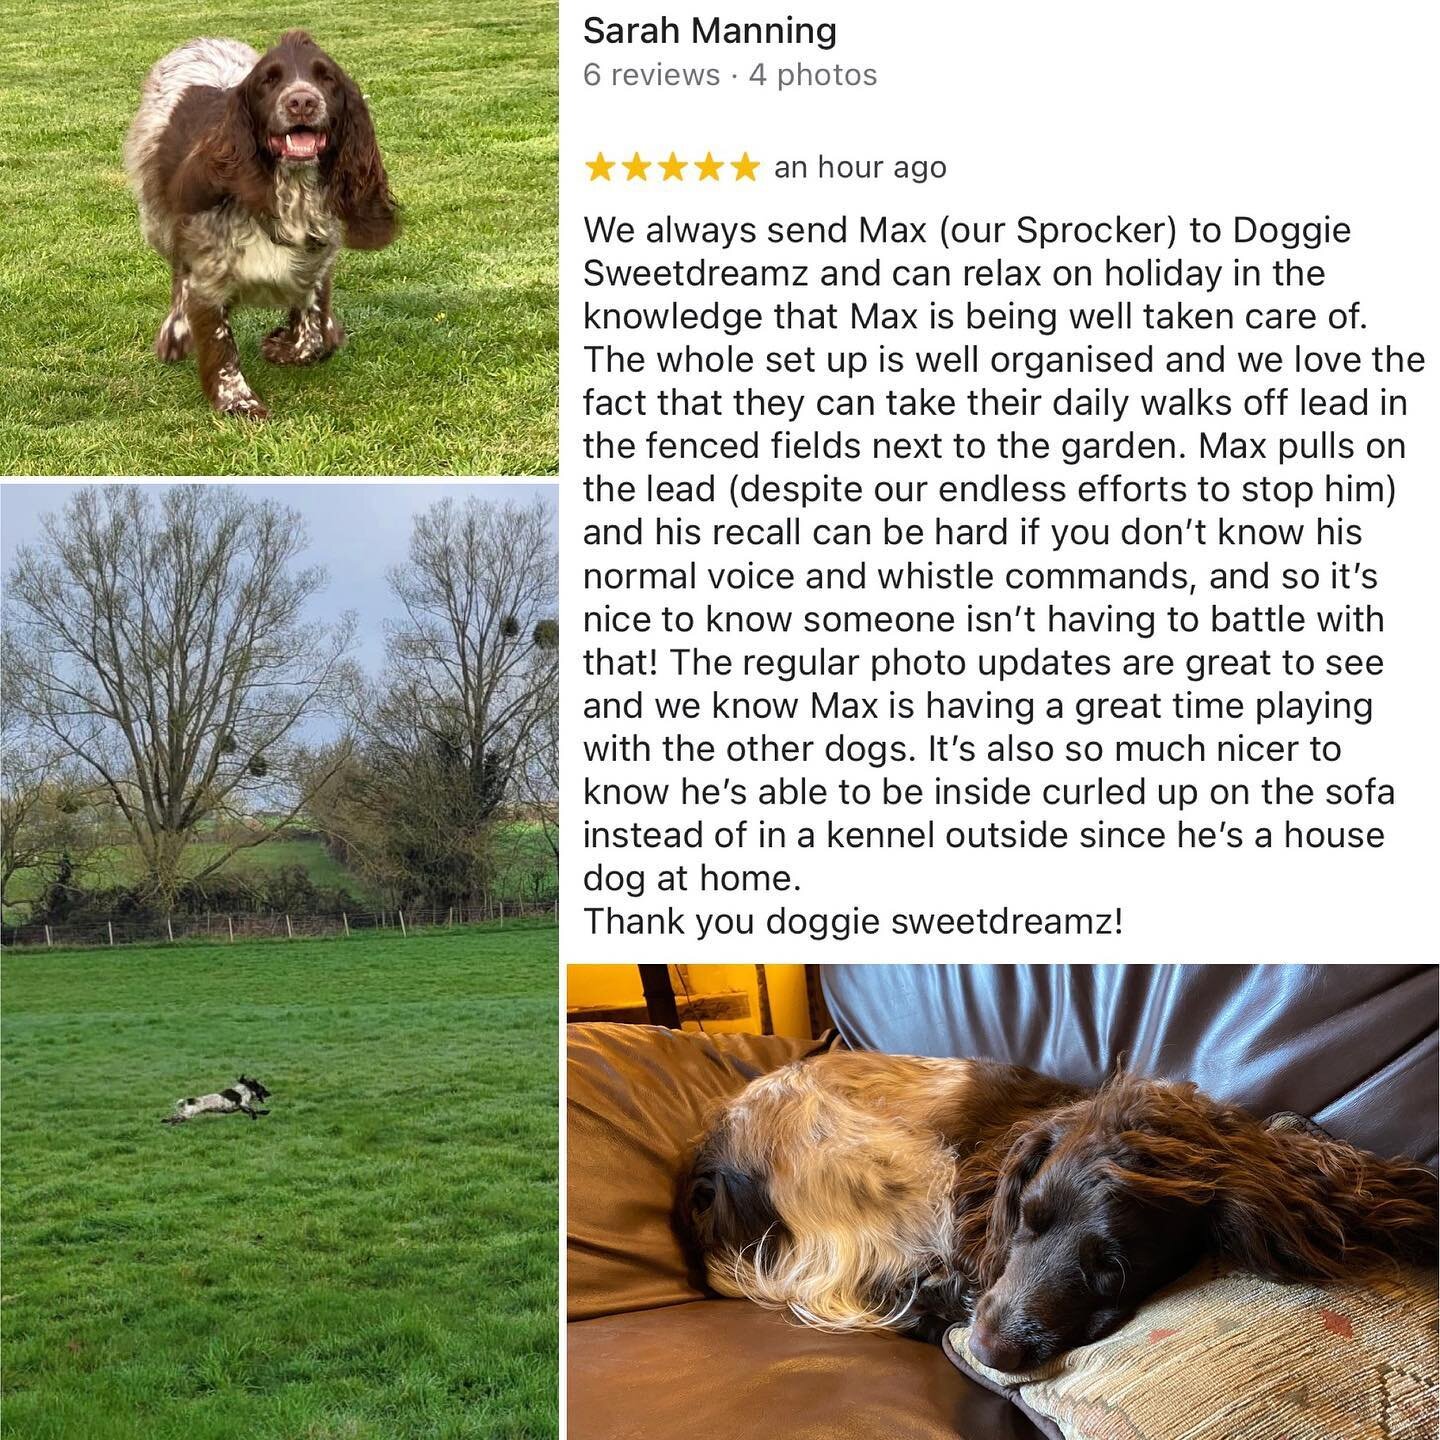 We&rsquo;re always so grateful when our clients take the time to leave us a review, thank you so much 🐾 #sprocker #doghomeboarding #dogboarding #offleadwalks #comfysofas #happydogs